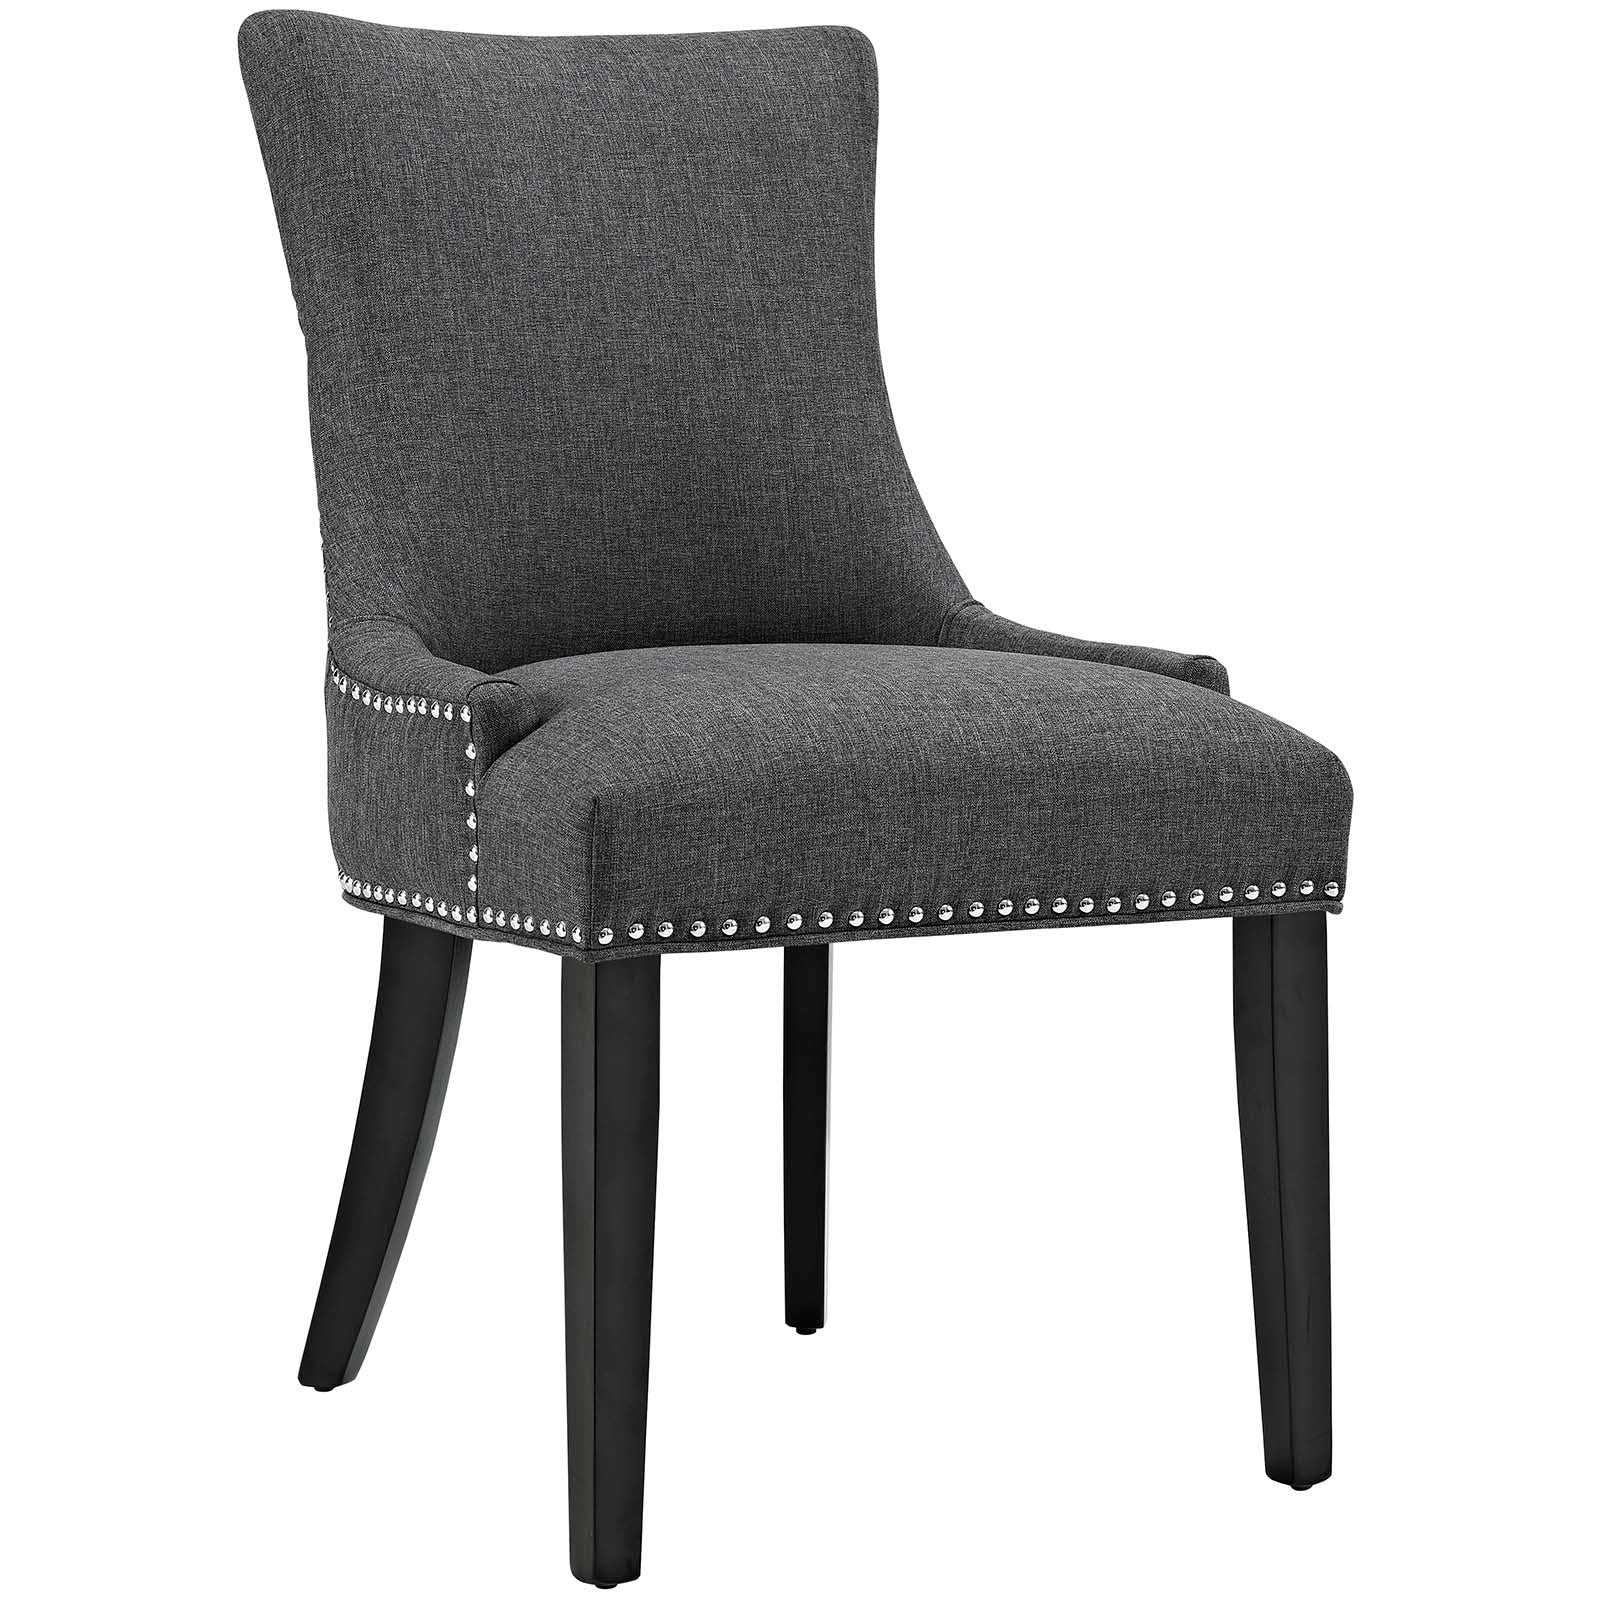 Modway Dining Chairs - Marquis Dining Chair Fabric Gray (Set of 4)